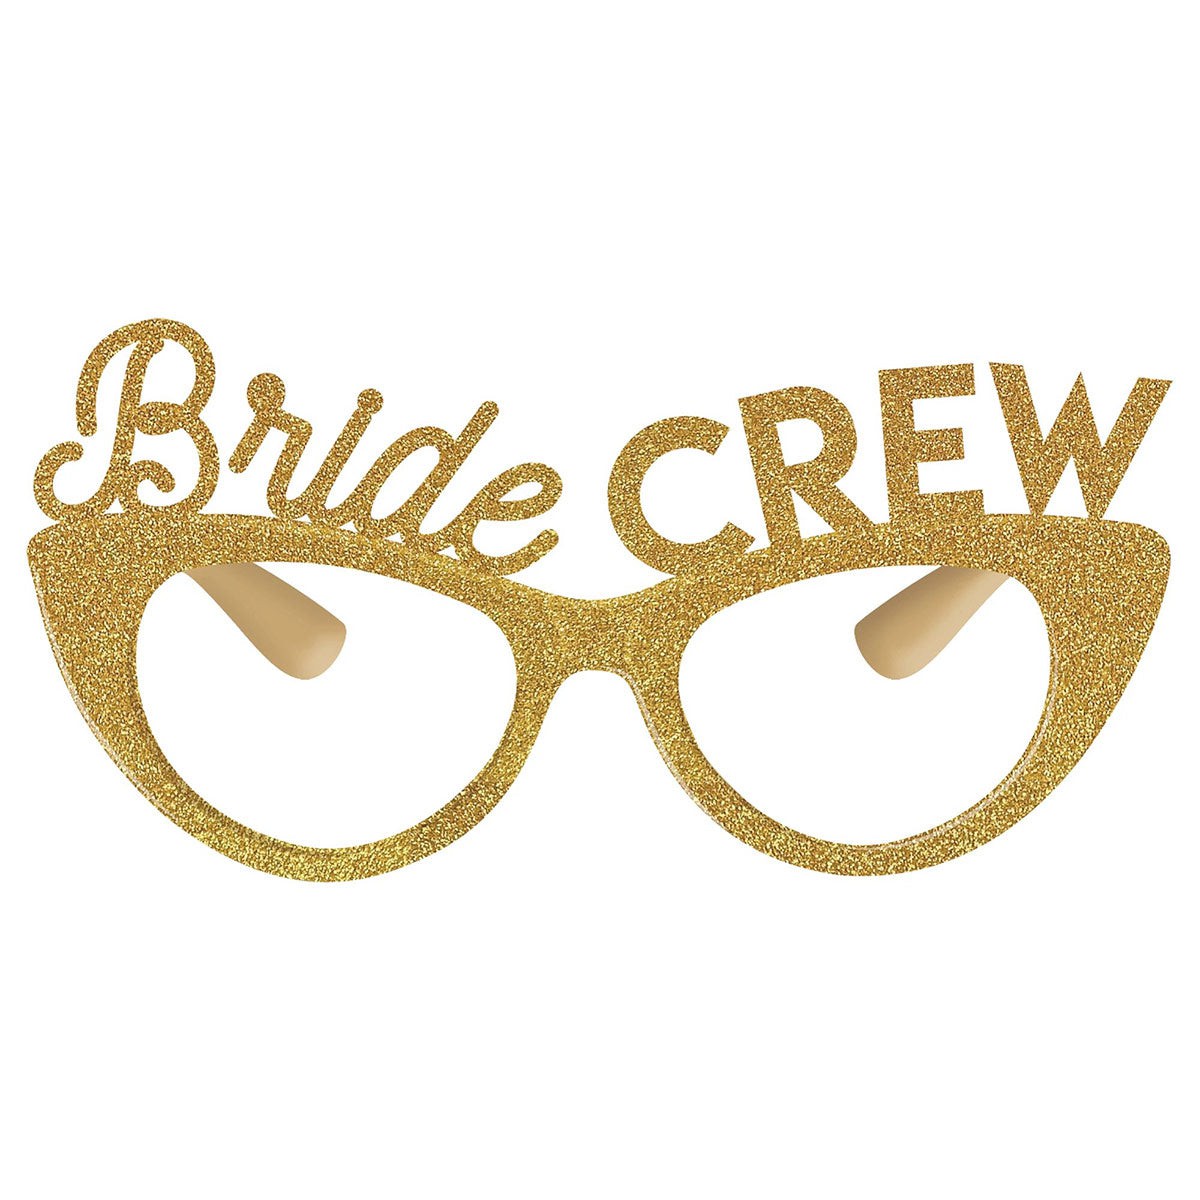 AMSCAN CA Bridal Shower Bridal Shower Bride Crew Gold Glitter Glasses, Luxurious Shower Collection, 6 count 192937324516